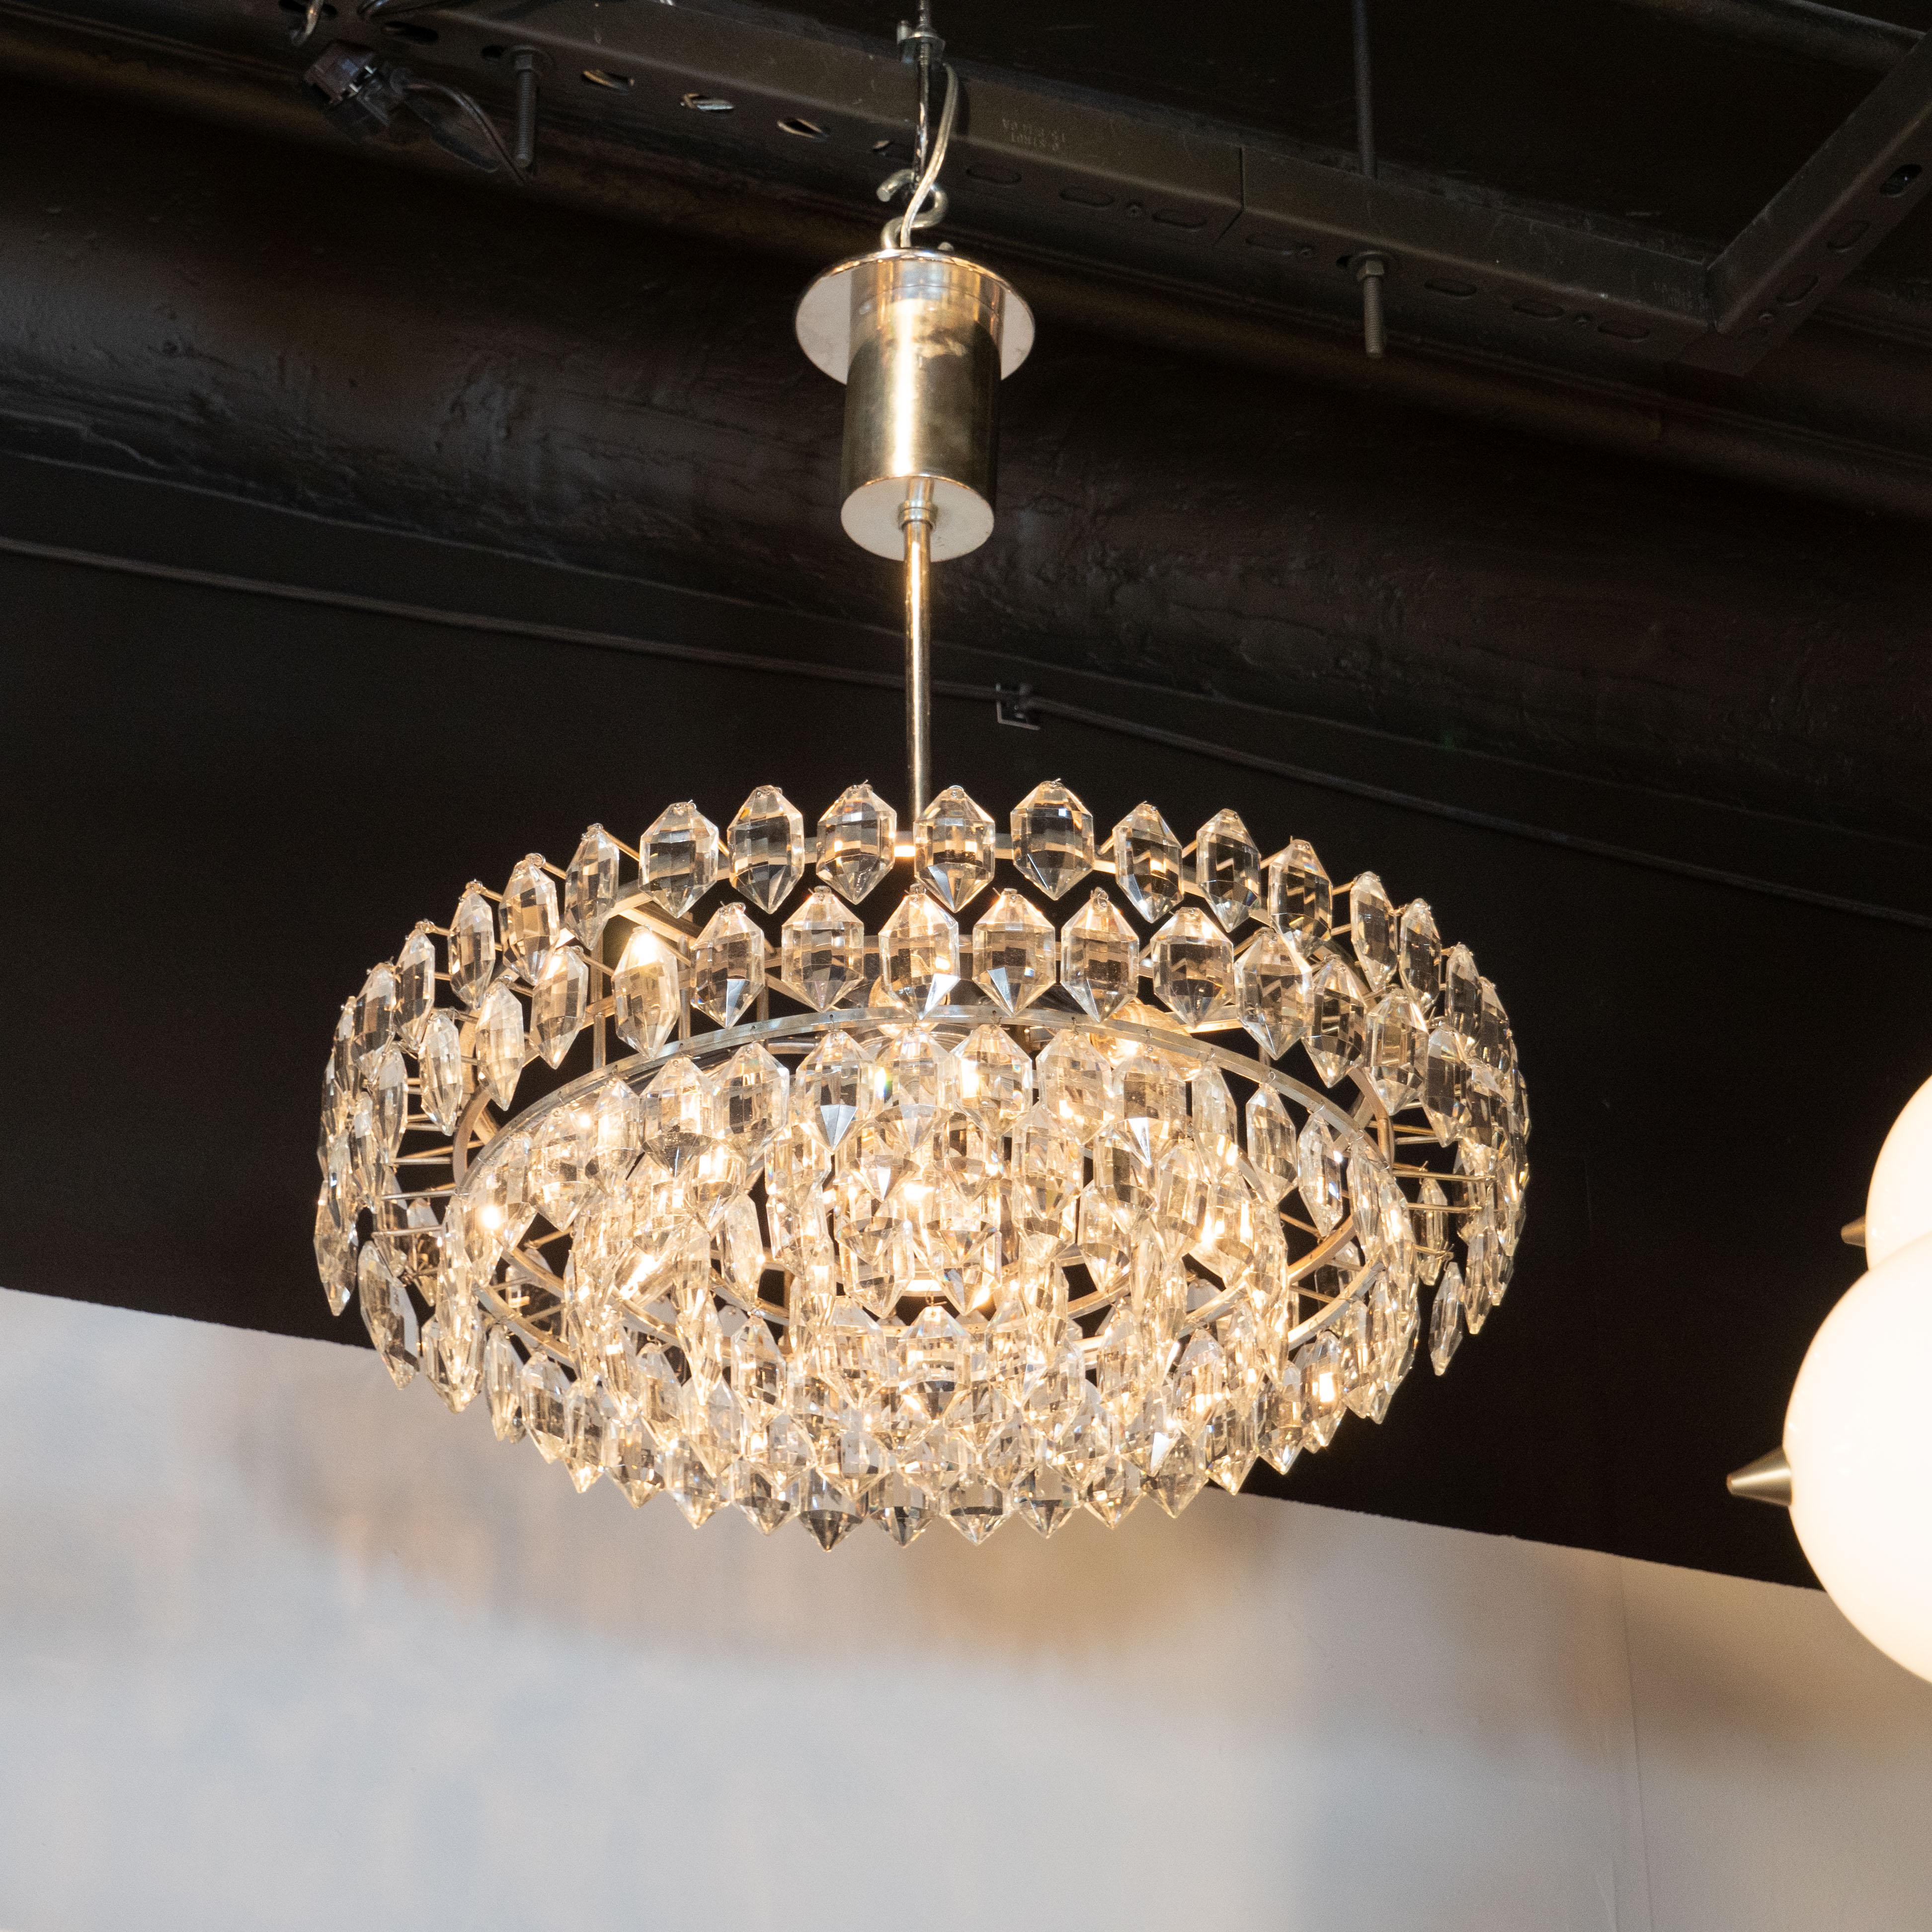 This elegant and refined Mid-Century Modern chandelier was realized by the esteemed Austrian atelier, Bakalowits and Sohne, circa 1960. It features five tiers of cut and beveled crystal- resembling rows of brilliant white diamonds- consisting of